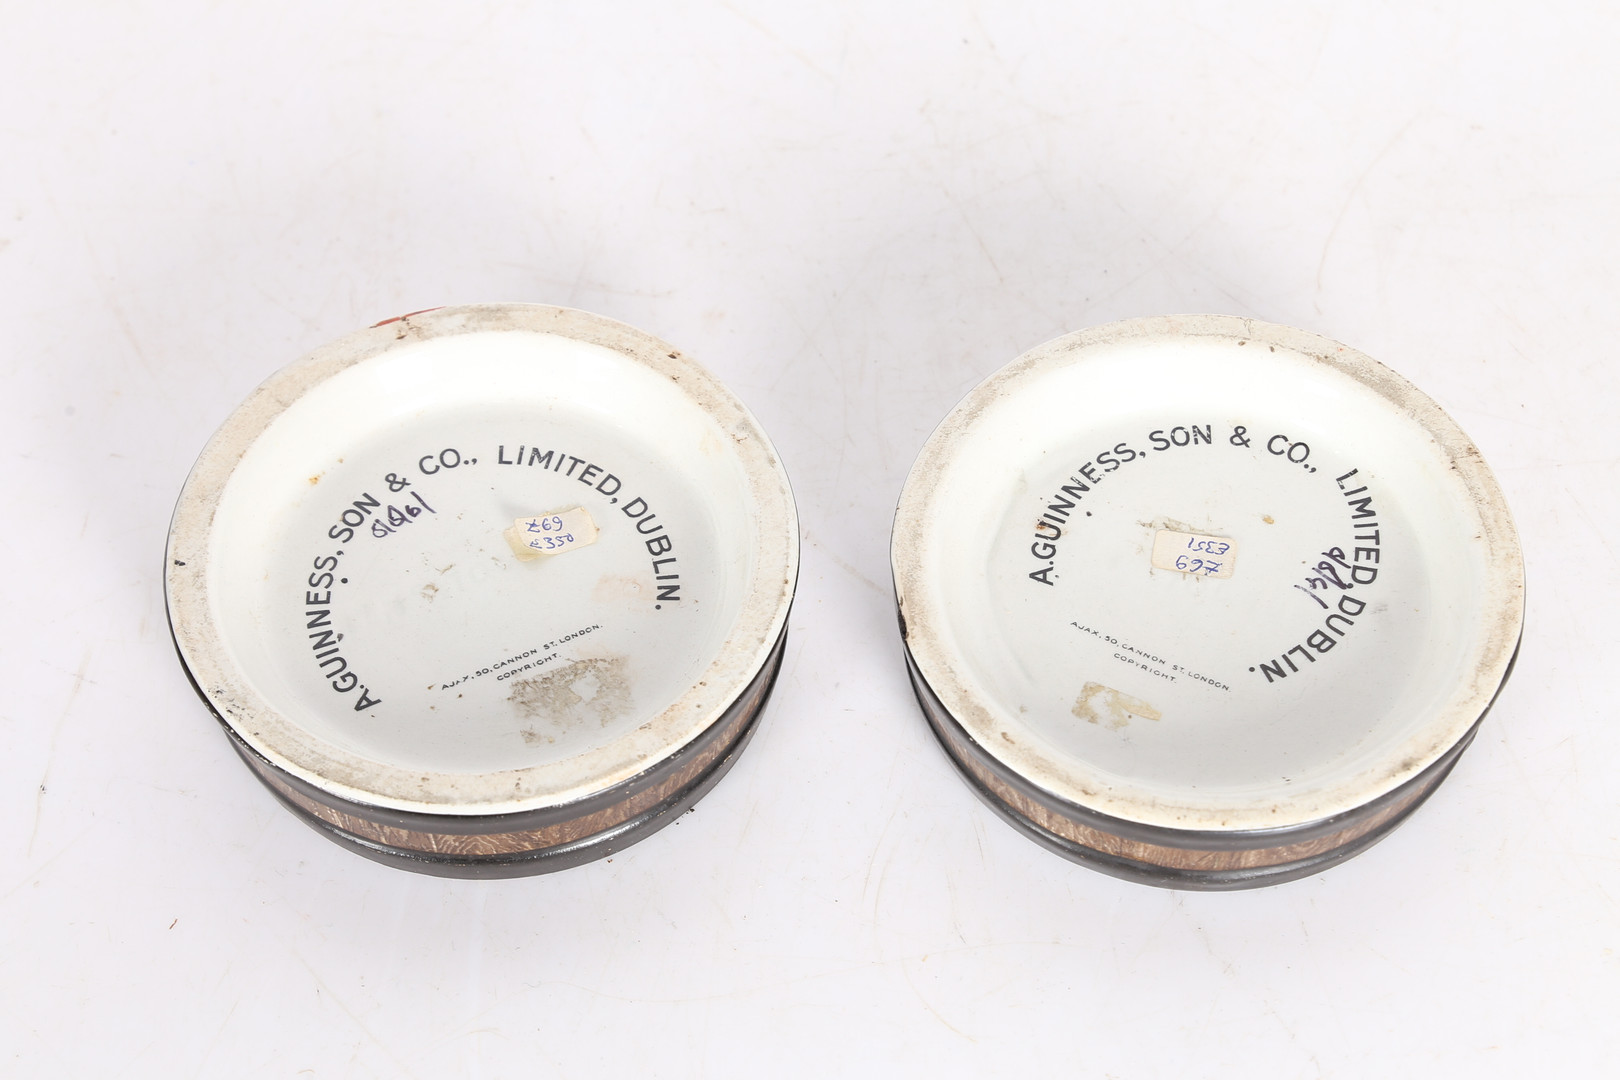 A PAIR OF GUINNESS STOUT ASHTRAYS. - Image 5 of 5